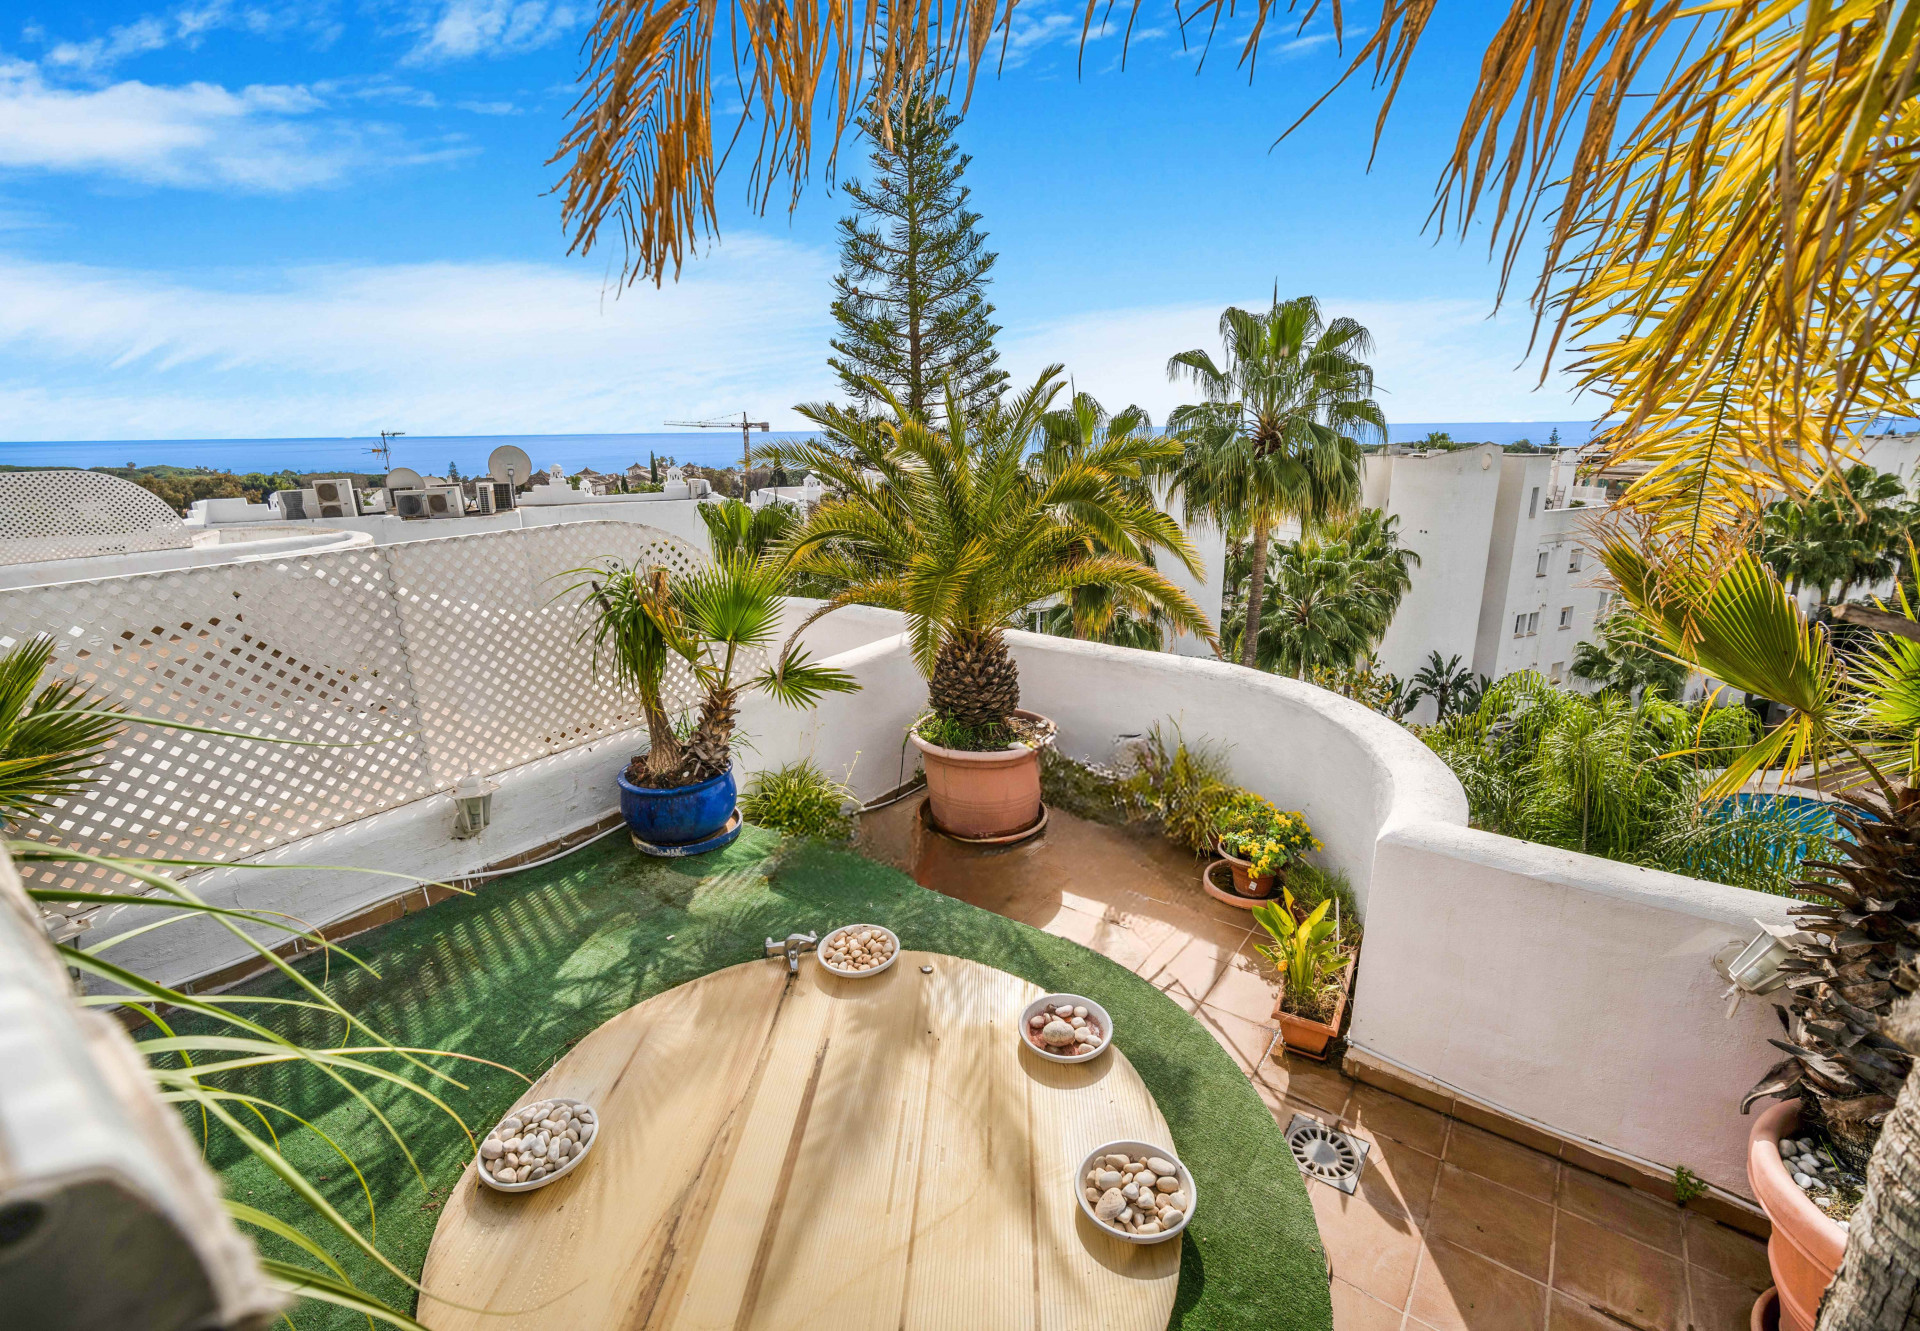 Superb three bedroom, duplex penthouse in the well-known and gated community Marbella Real with sea views!